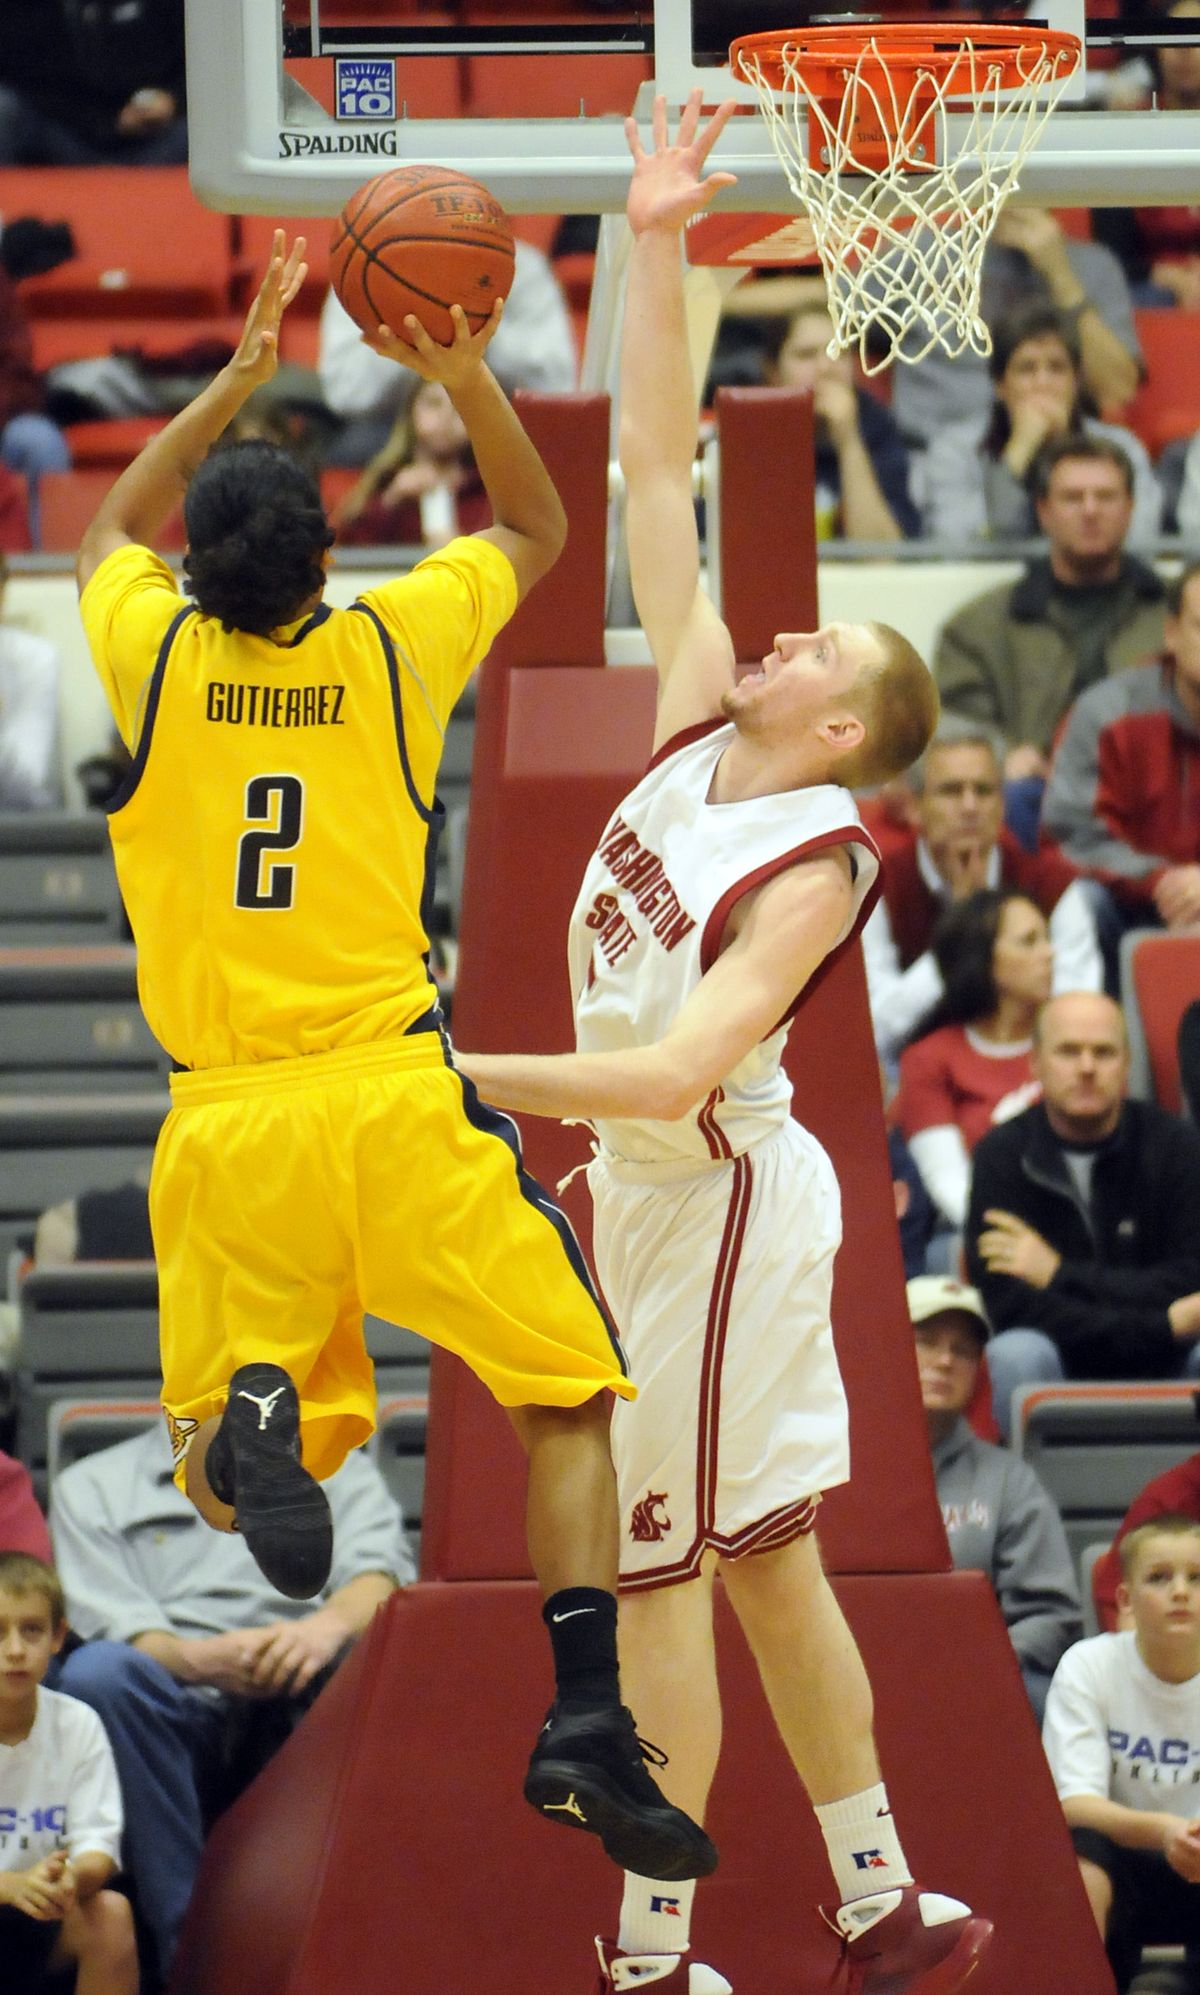 Abe Lodwick, right, of the Cougars forces a missed shot by Cal’s Jorge Gutierrez.   (Jesse Tinsley / The Spokesman-Review)